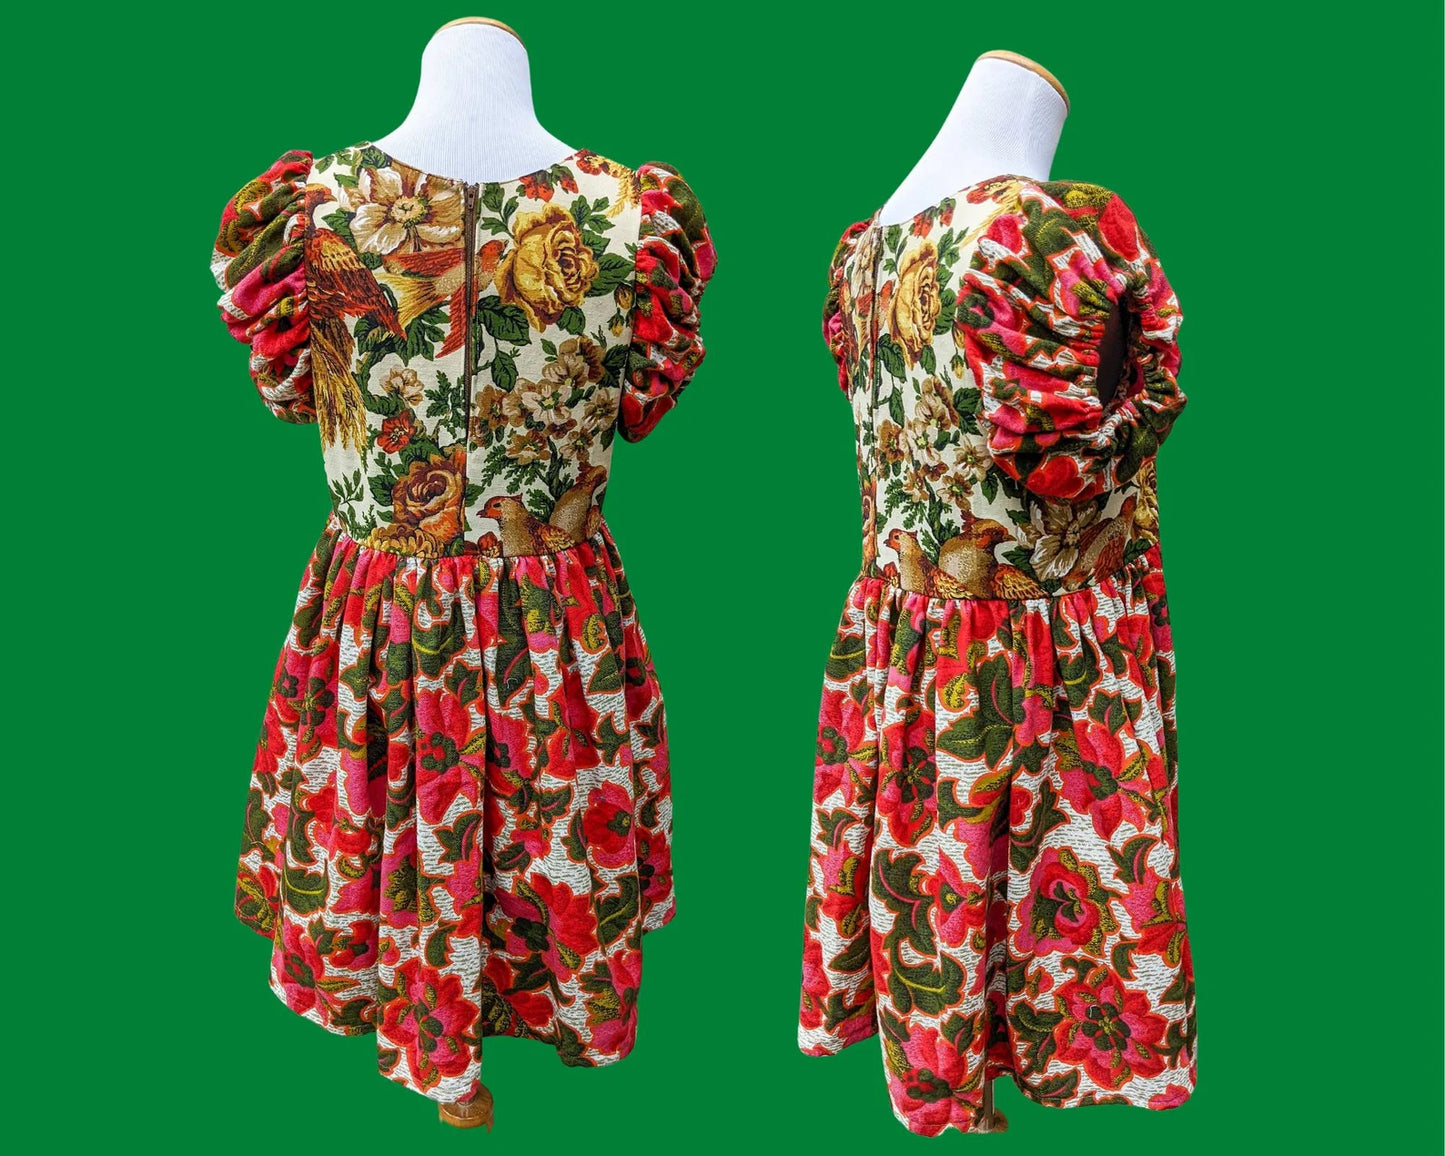 Handmade, Upcycled Vintage 1950's Fabric, Birds and Flowers for the Bodice, Short Puffy Sleeves Dress Size S-M